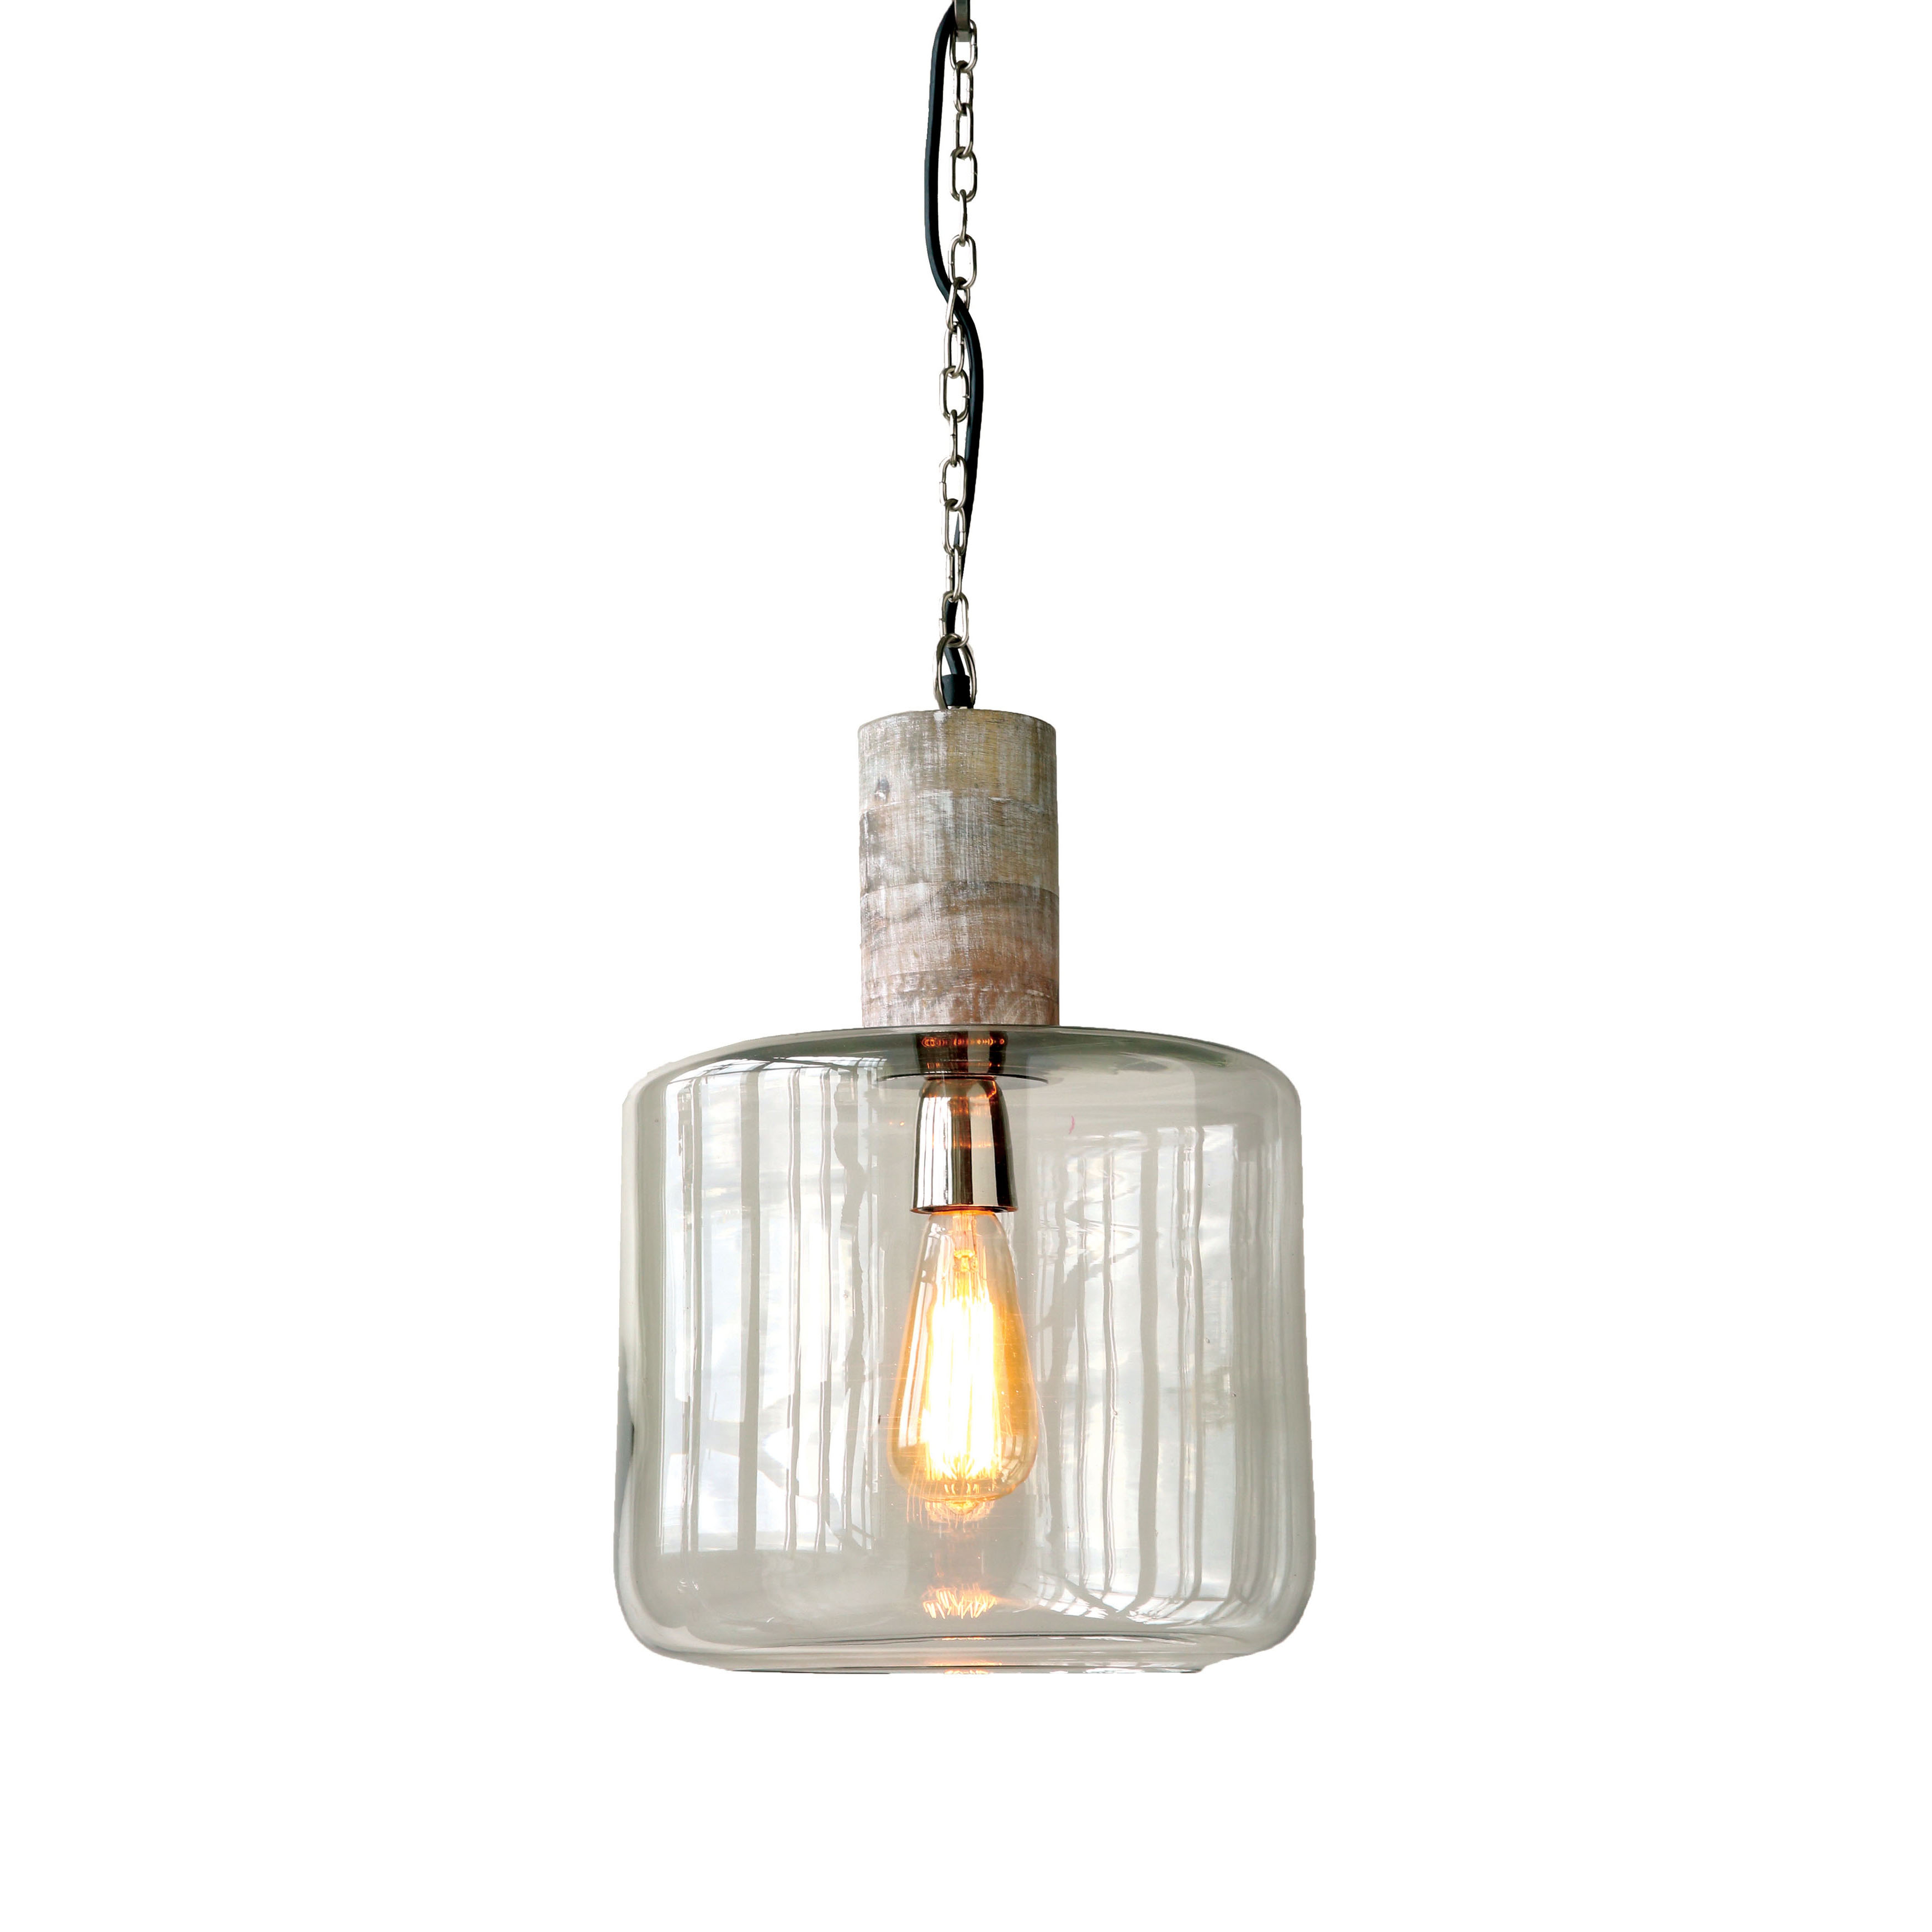 Round Clear Glass & Mango Wood Hanging Pendant Light - Nomad Home